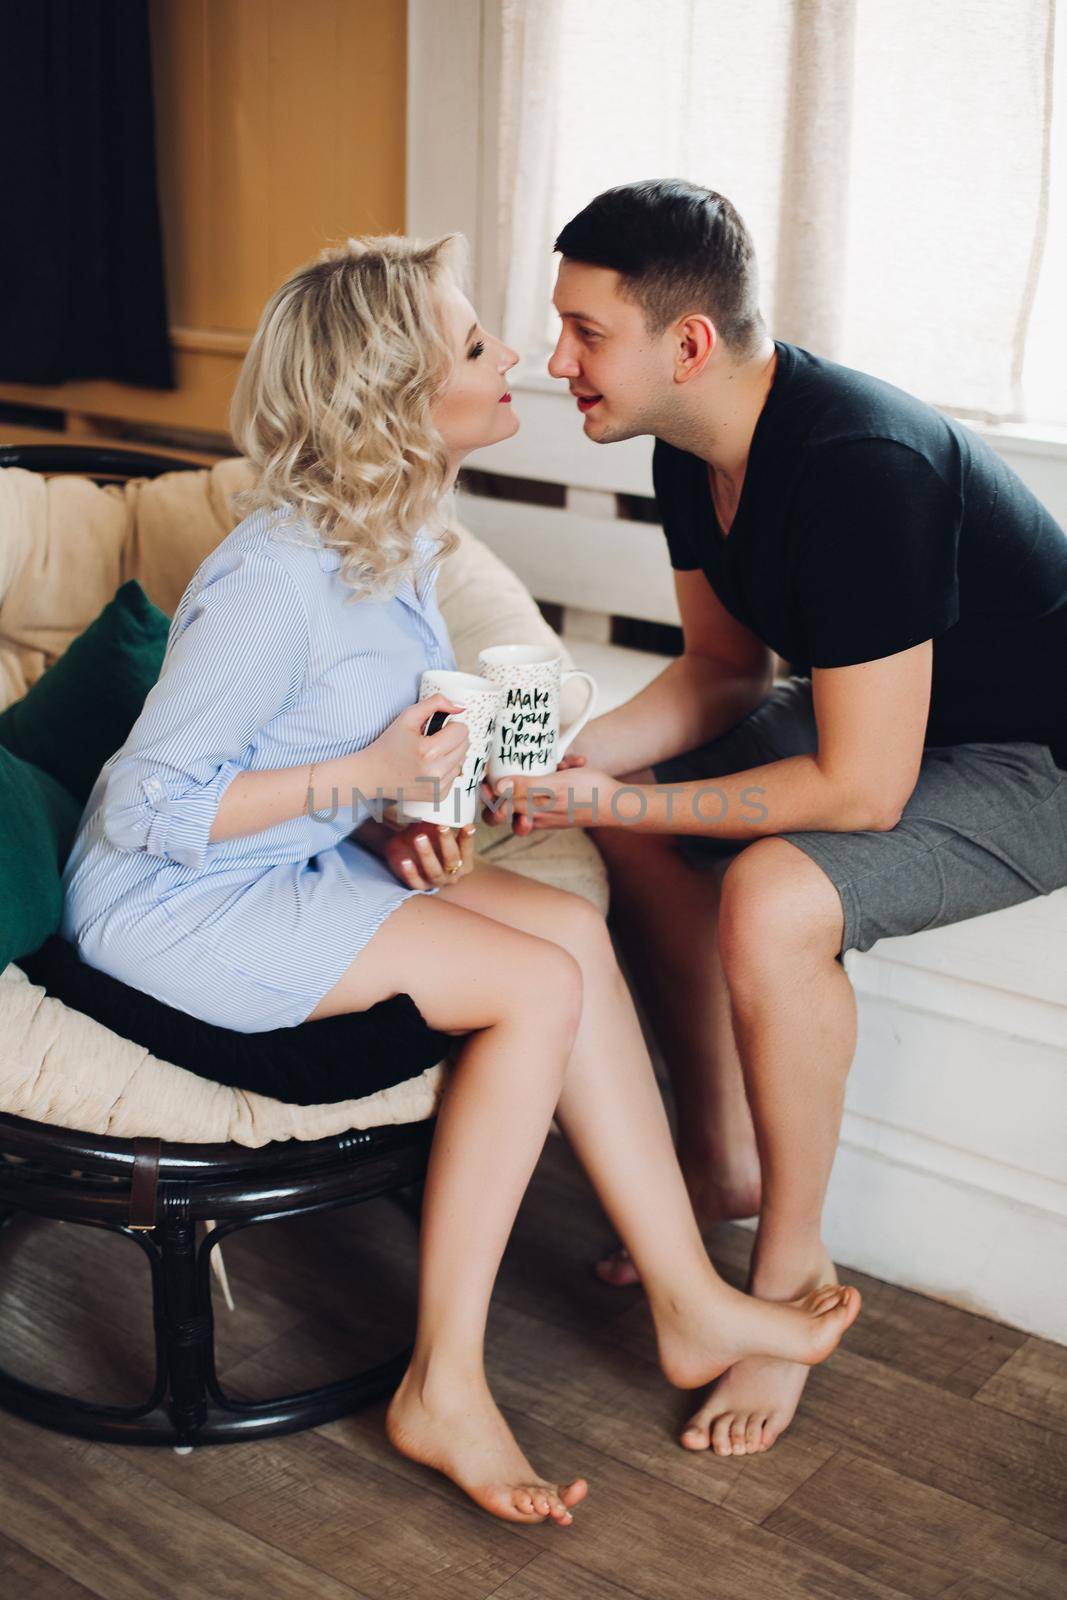 Close up of young sweet couple in love. Blonde girl in striped shirt and a man in black tshirt kissing tenderly,holding in their hands cups with creative inscription.Concept of love and relationship.